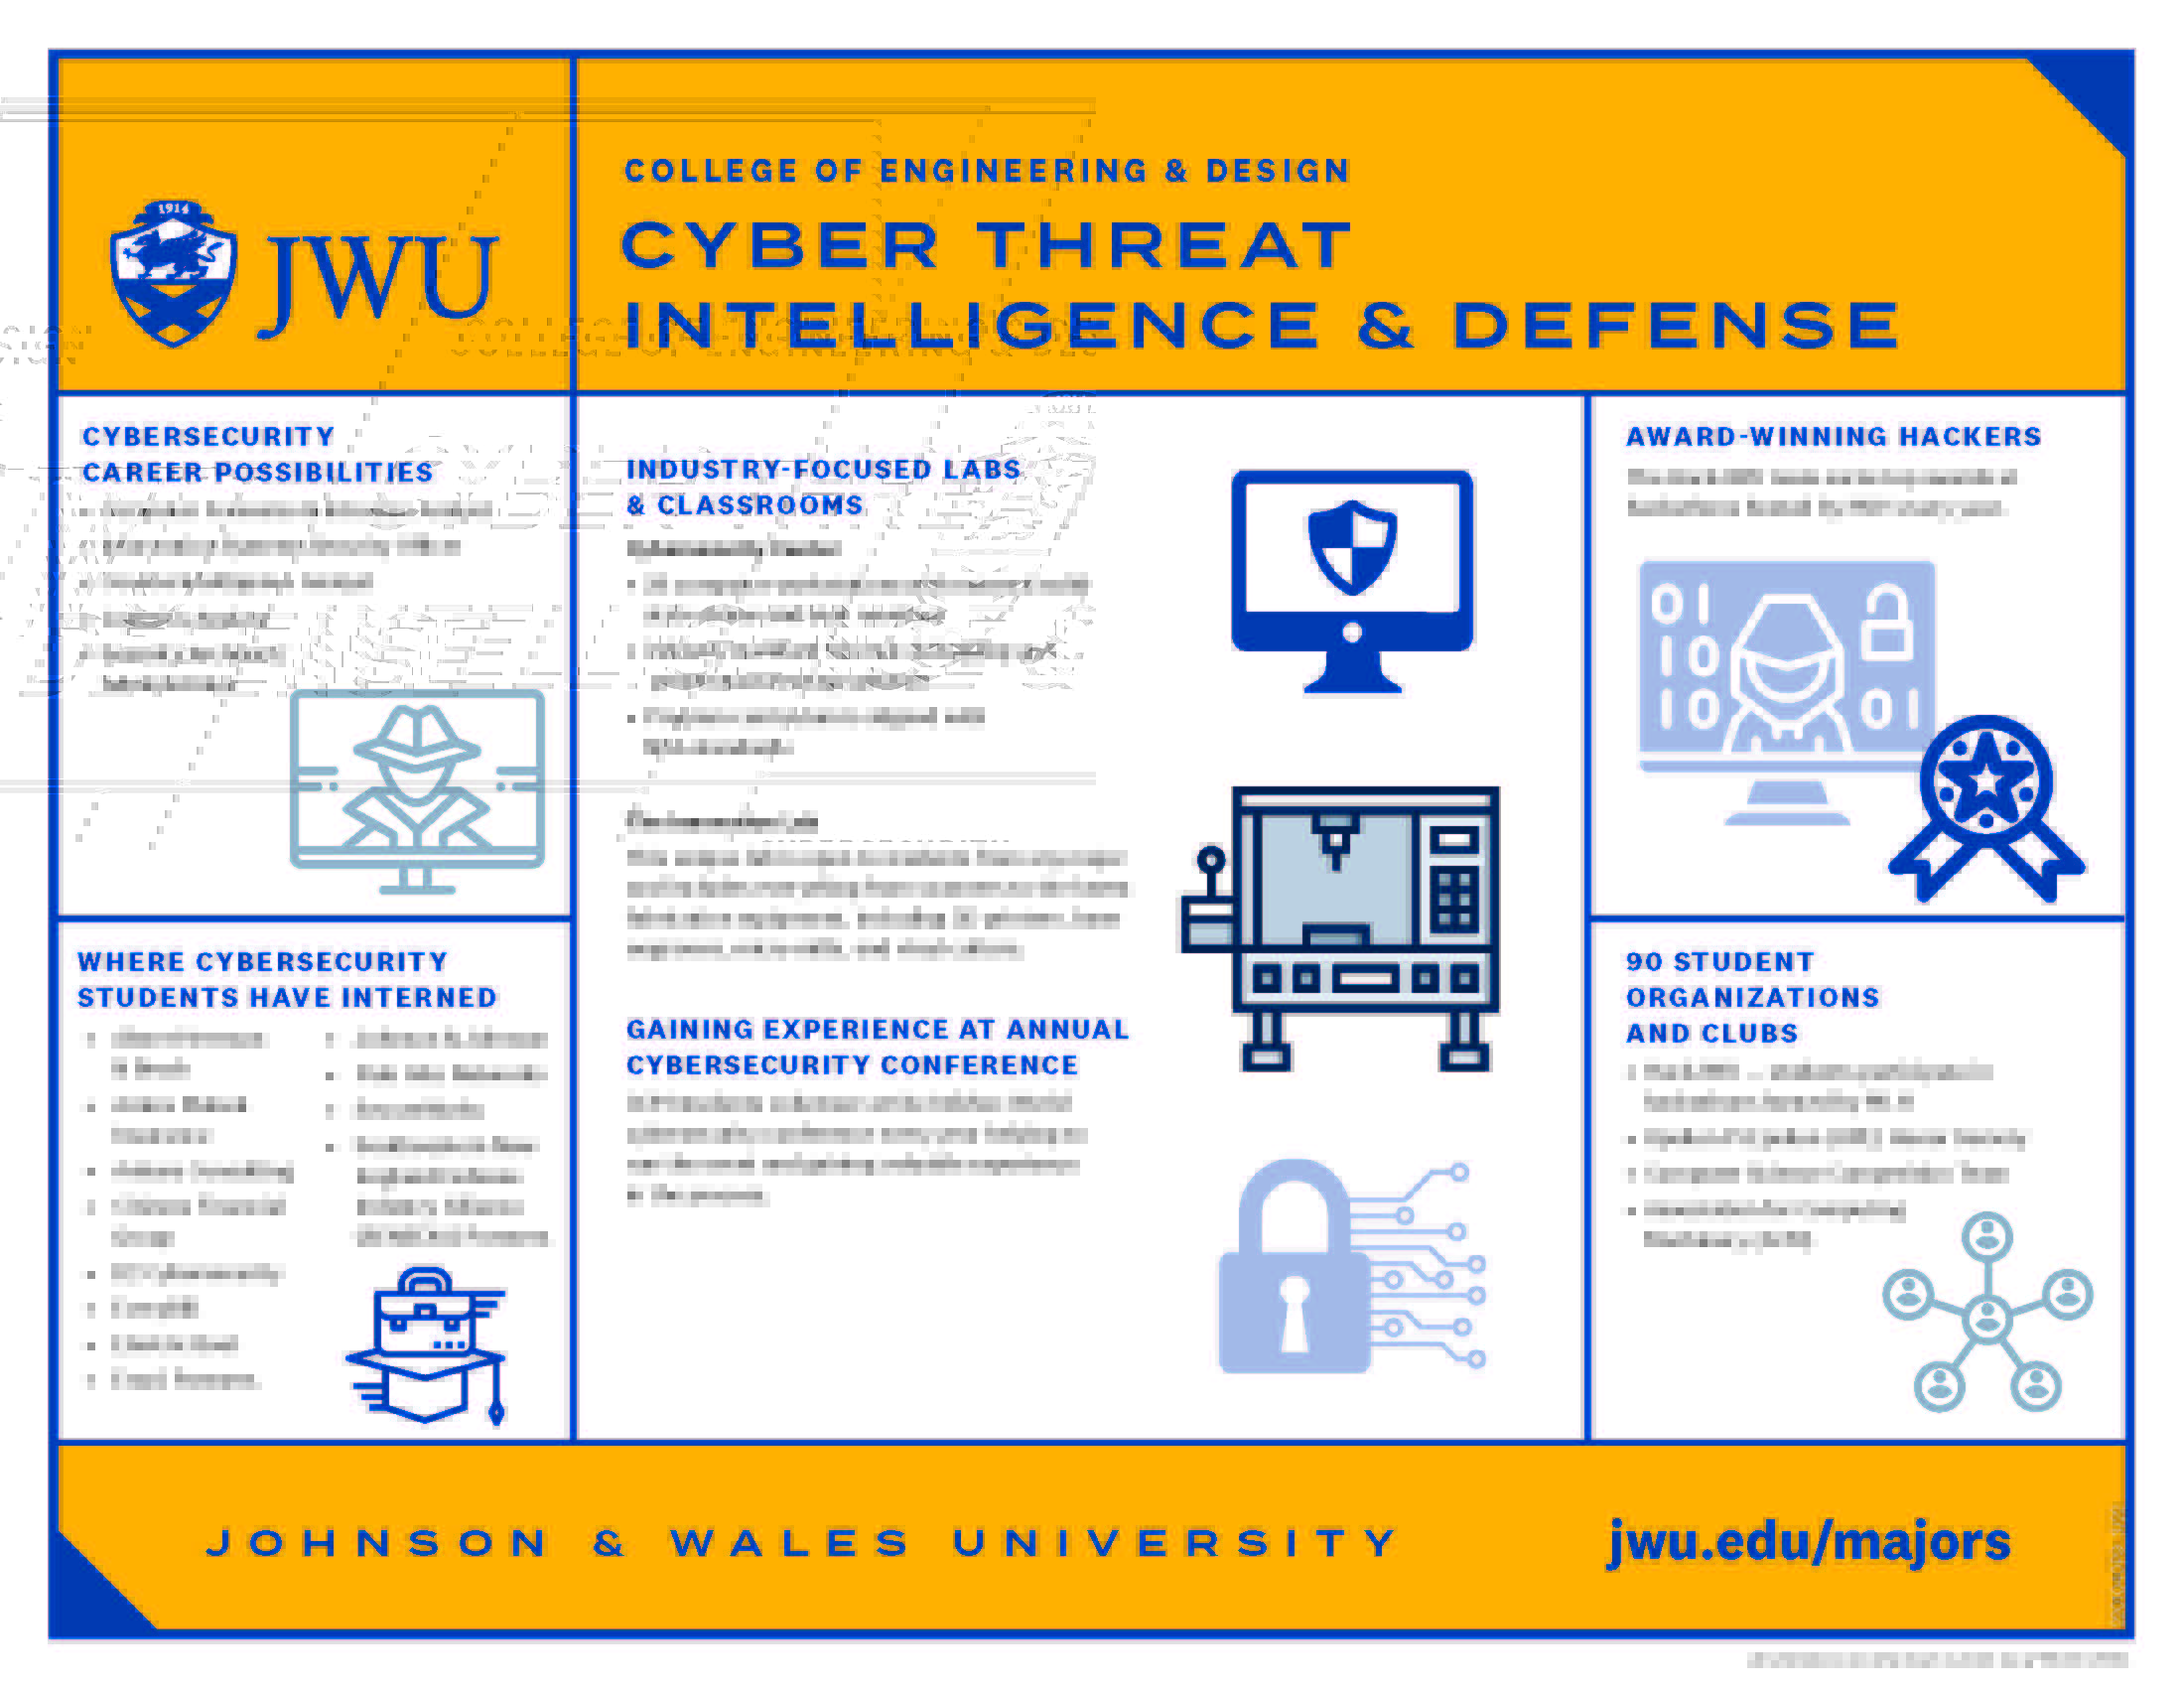 Infographic with facts and stats about JWU’s Cyber Threat Intelligence & Defense Program